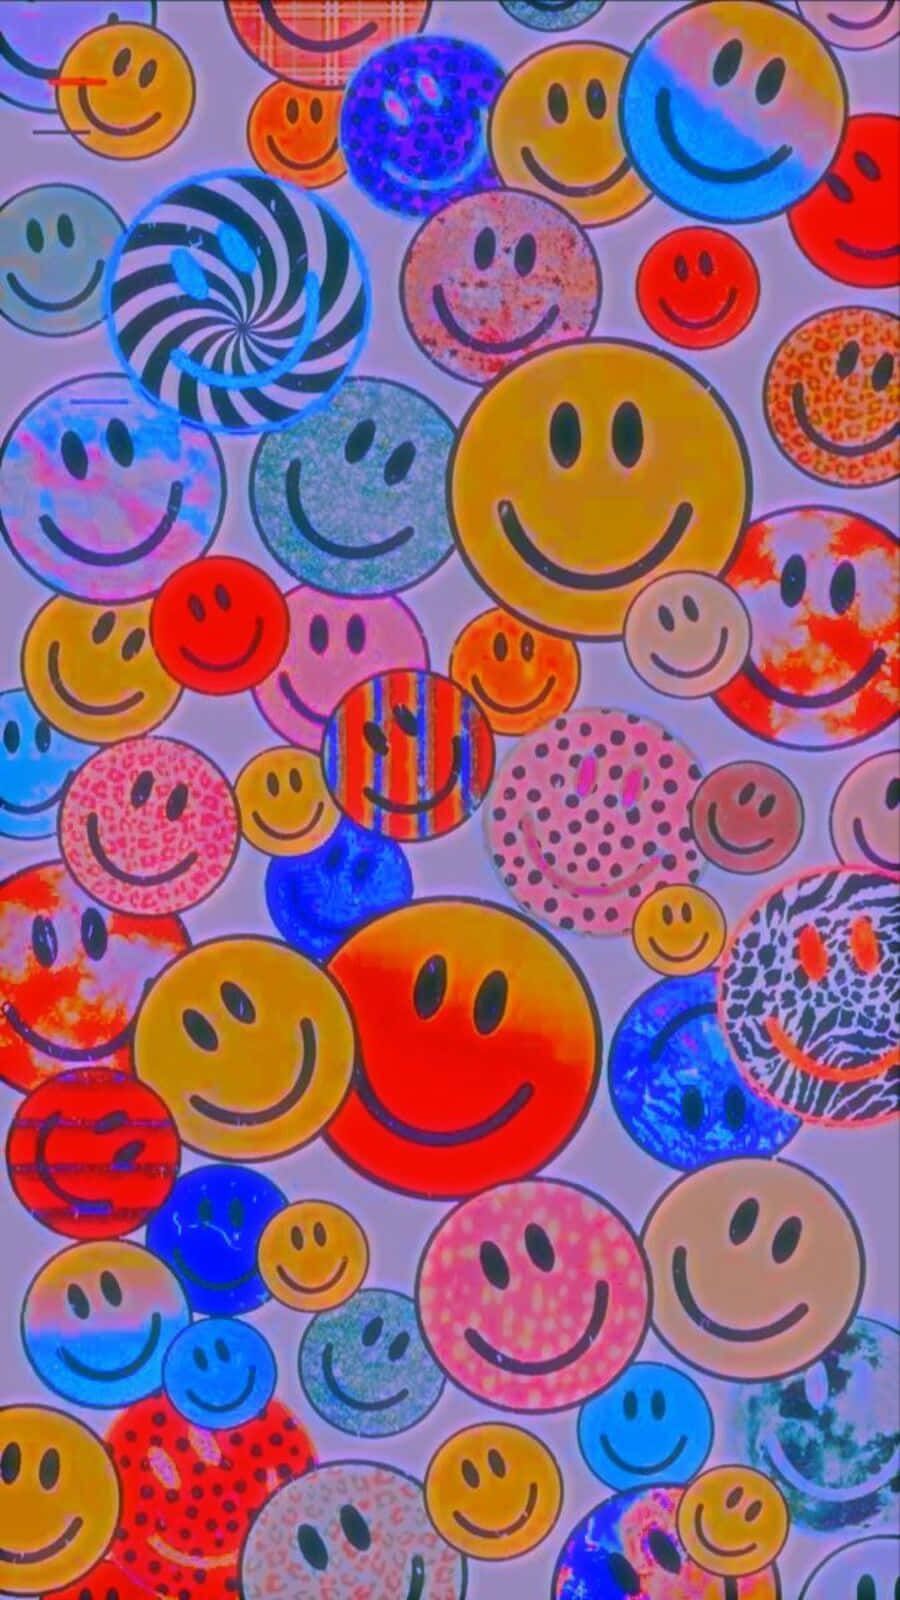 Download Aesthetic Smiley Face Wallpaper